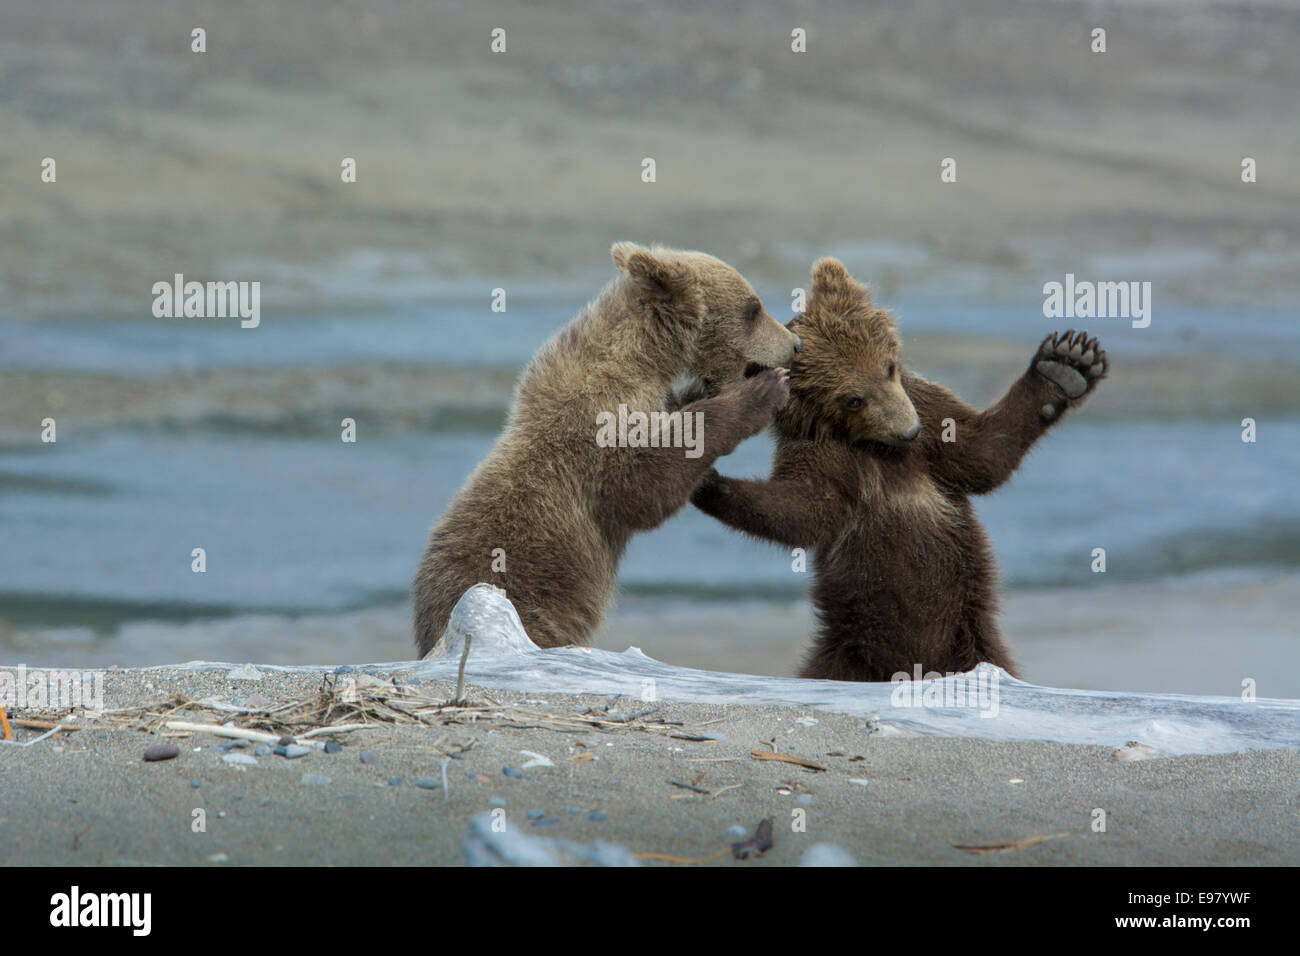 Two Grizzly Bear Spring Cubs, Ursus arctos, playing, with the appearance of whispering a secret, Cook Inlet, Alaska, USA Stock Photo